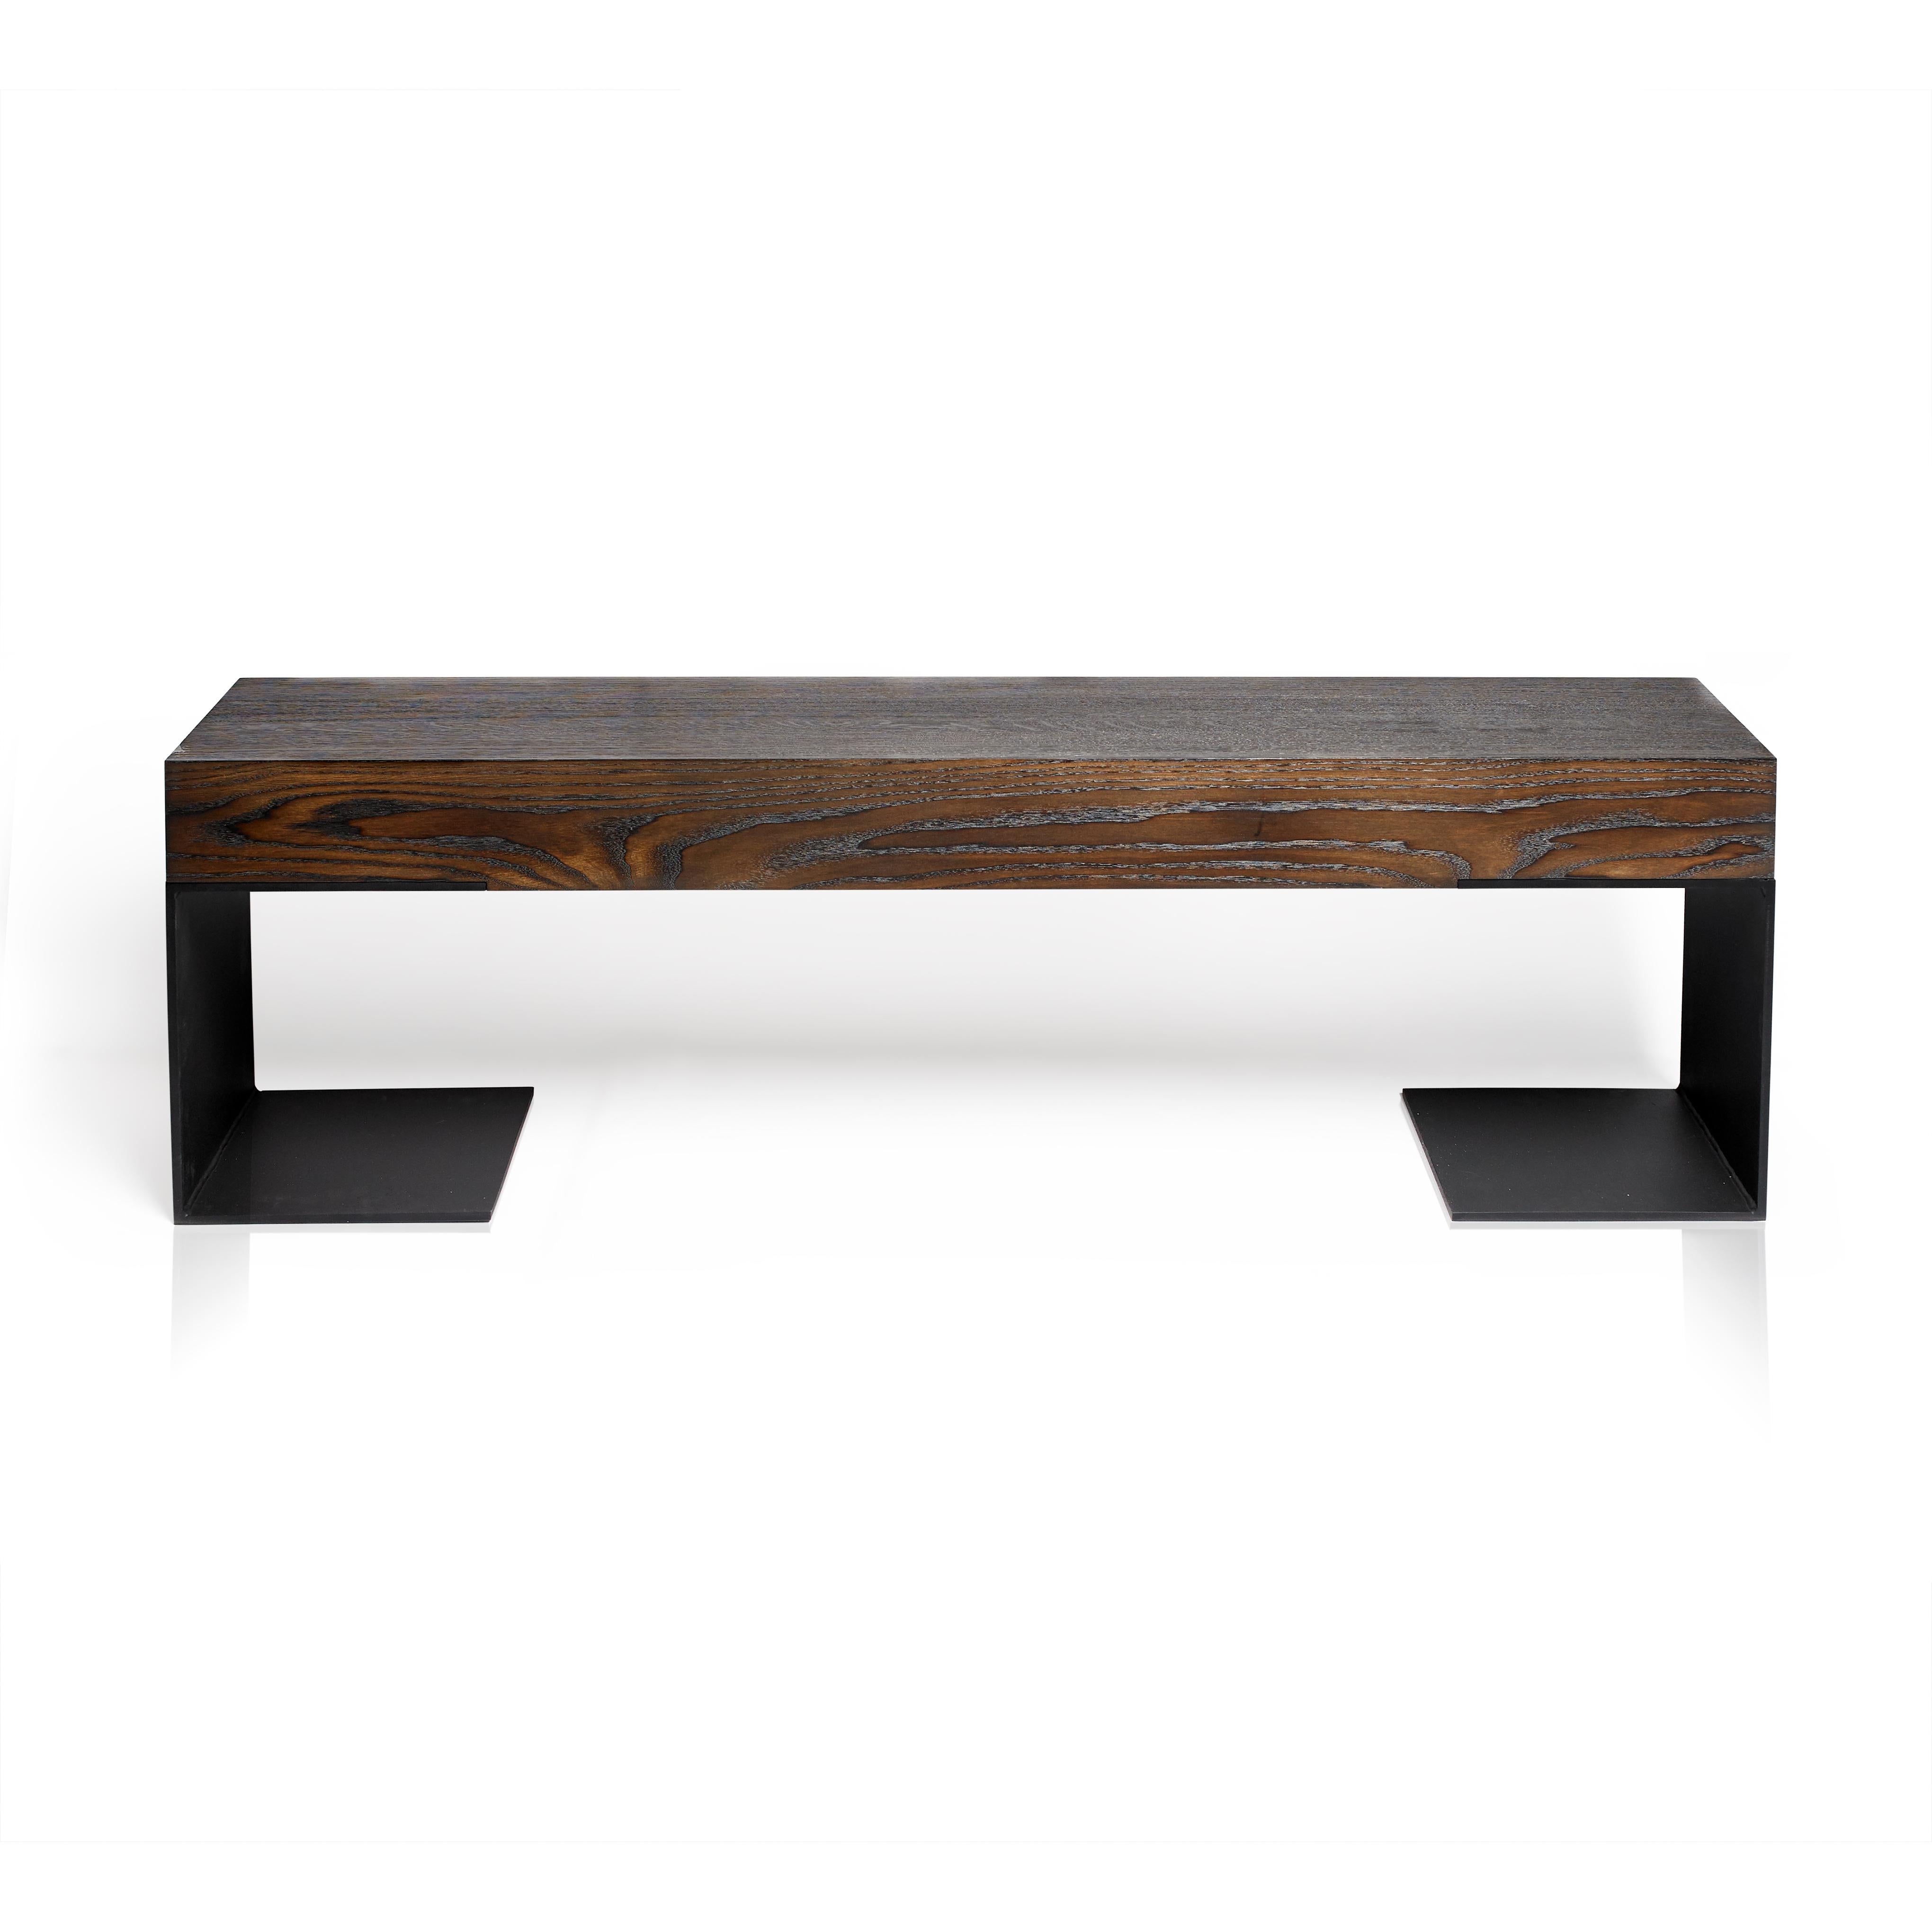 Modern industrial. The Kai Hallway bench is all about proportions, balancing the width of the steel legs and the thickness of the bench seat. It provides a modern industrial look using Torched Oak lamination's set on black steel legs. Designed by